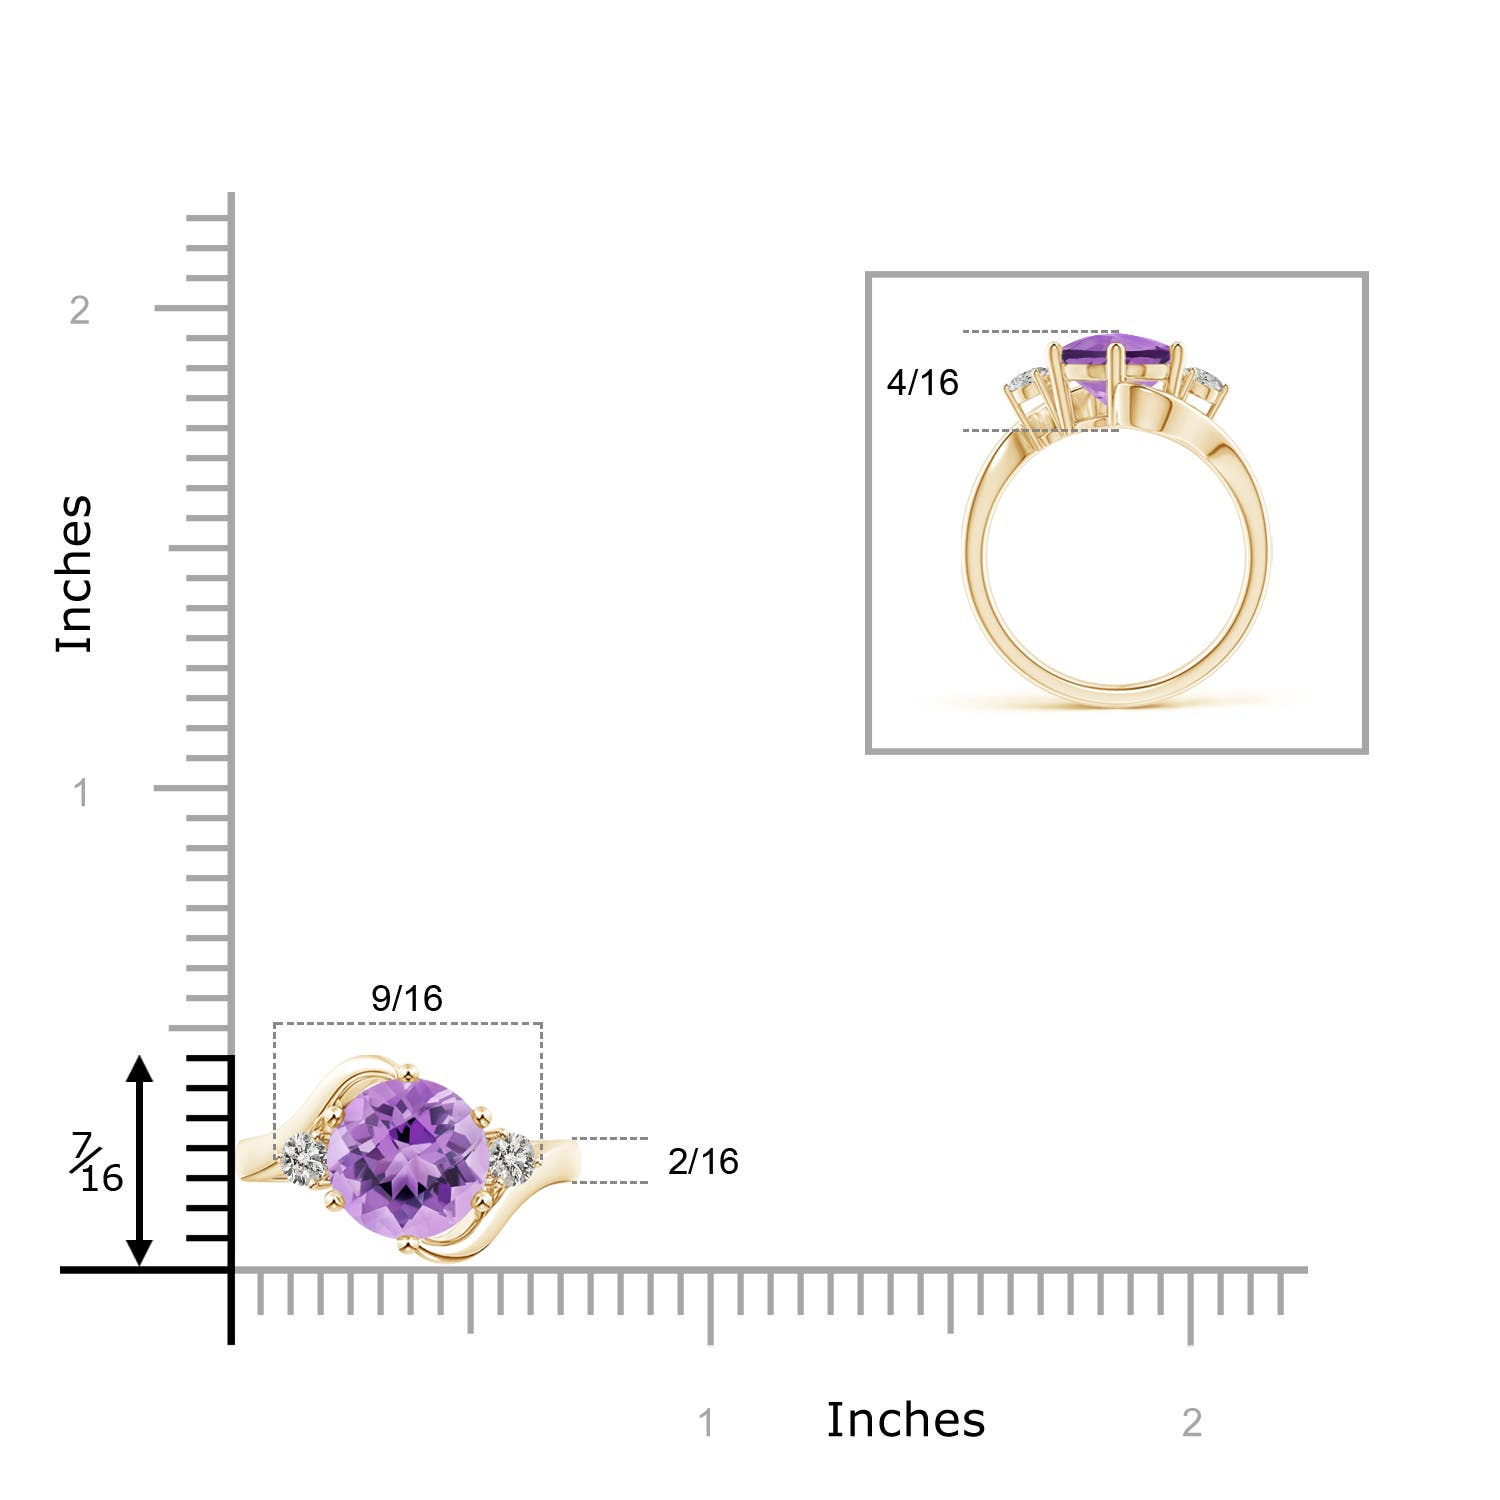 A - Amethyst / 1.84 CT / 14 KT Yellow Gold